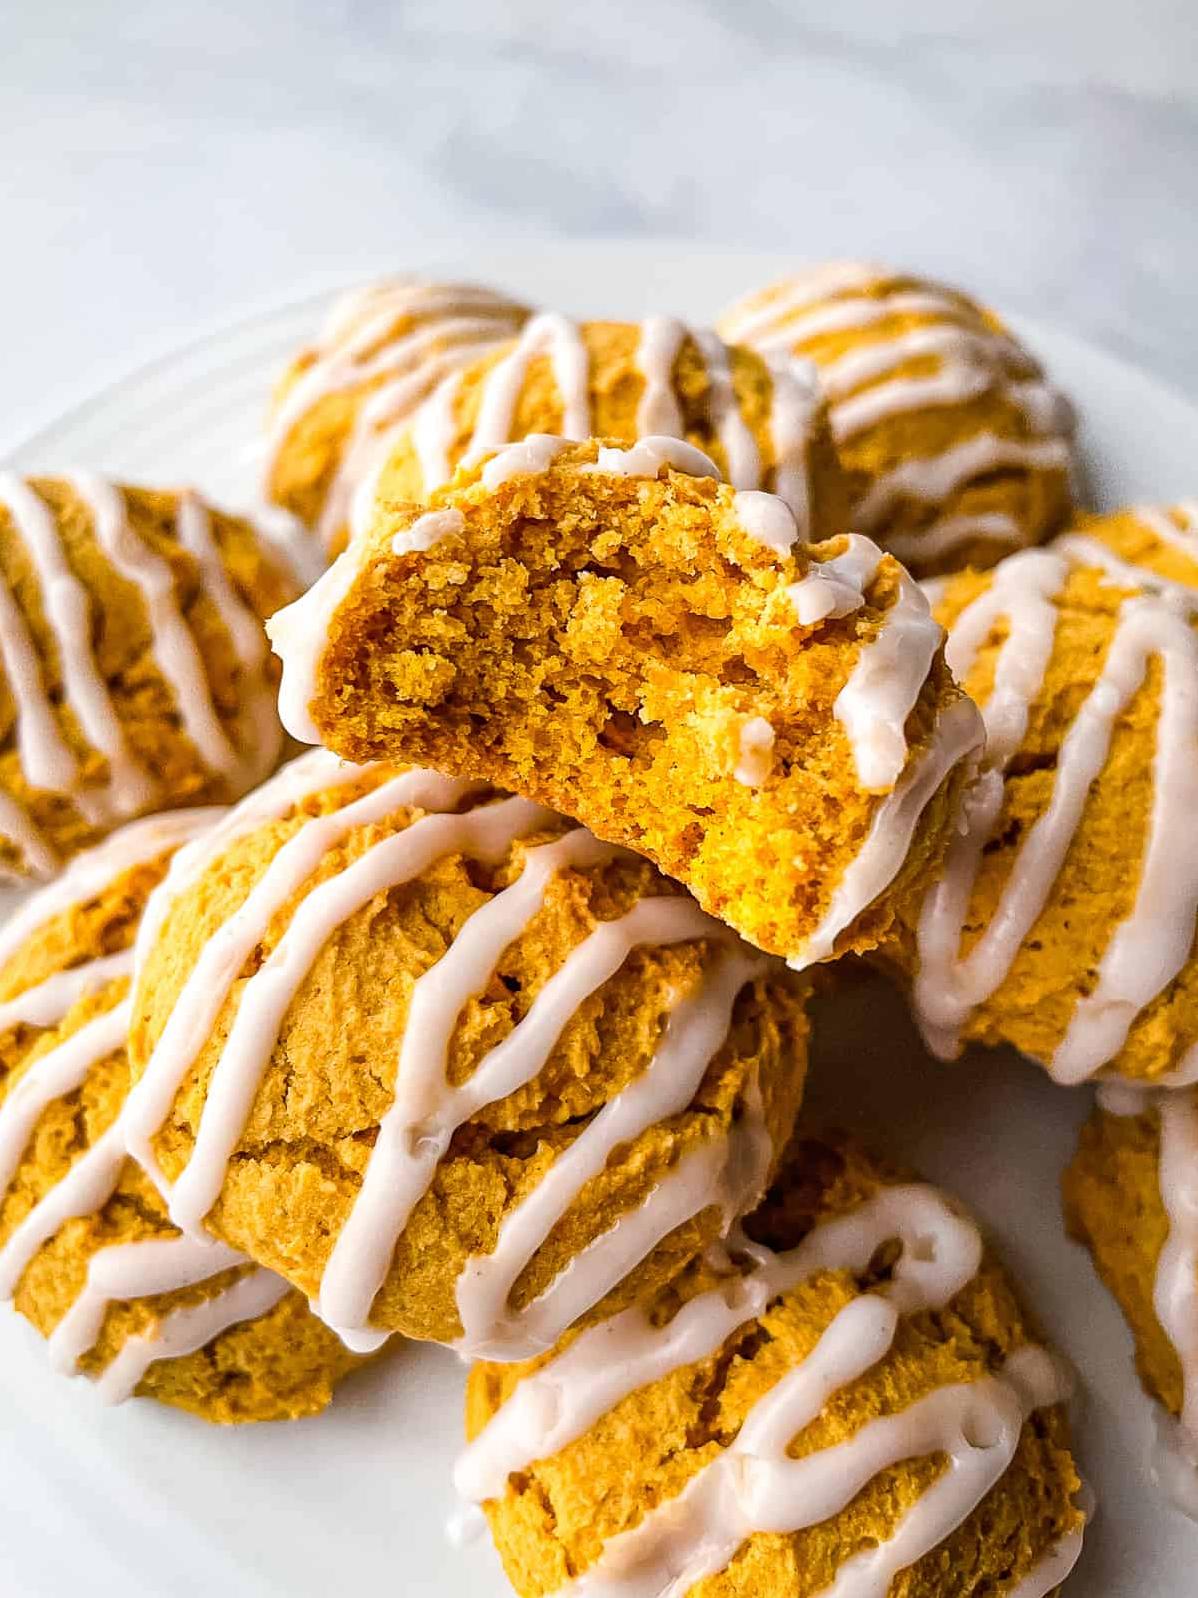  Just one bite and you'll be transported to a pumpkin patch.